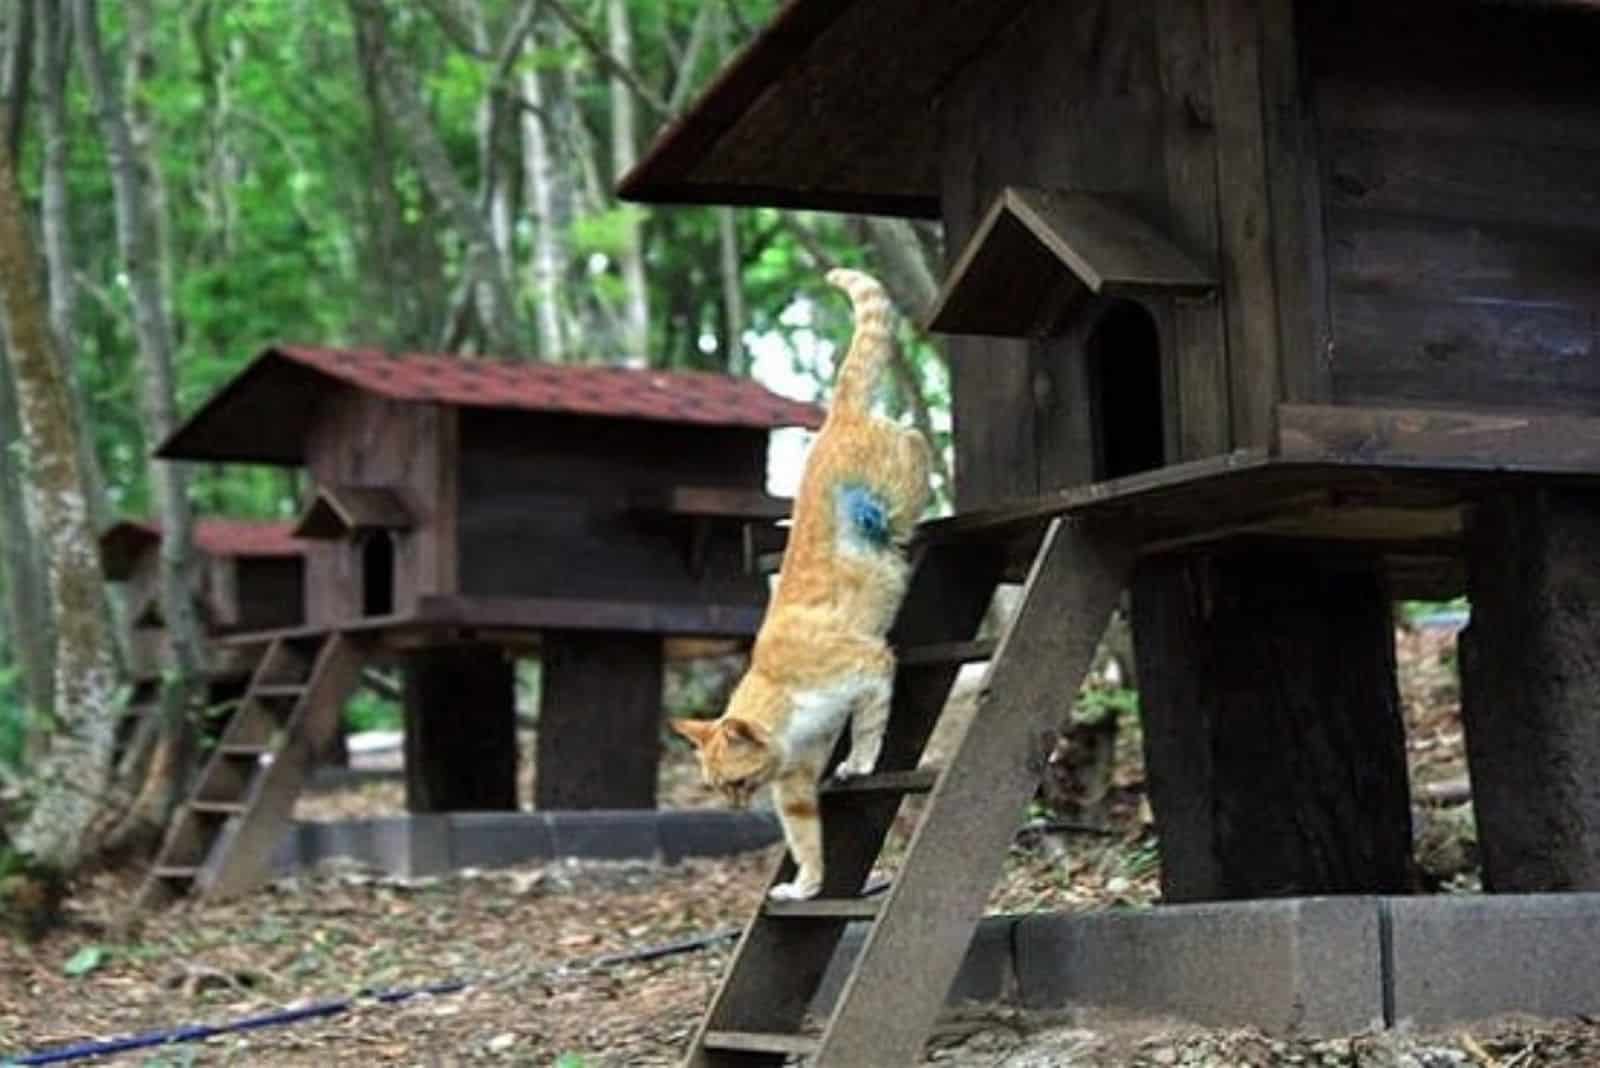 a cat climbing down the stairs